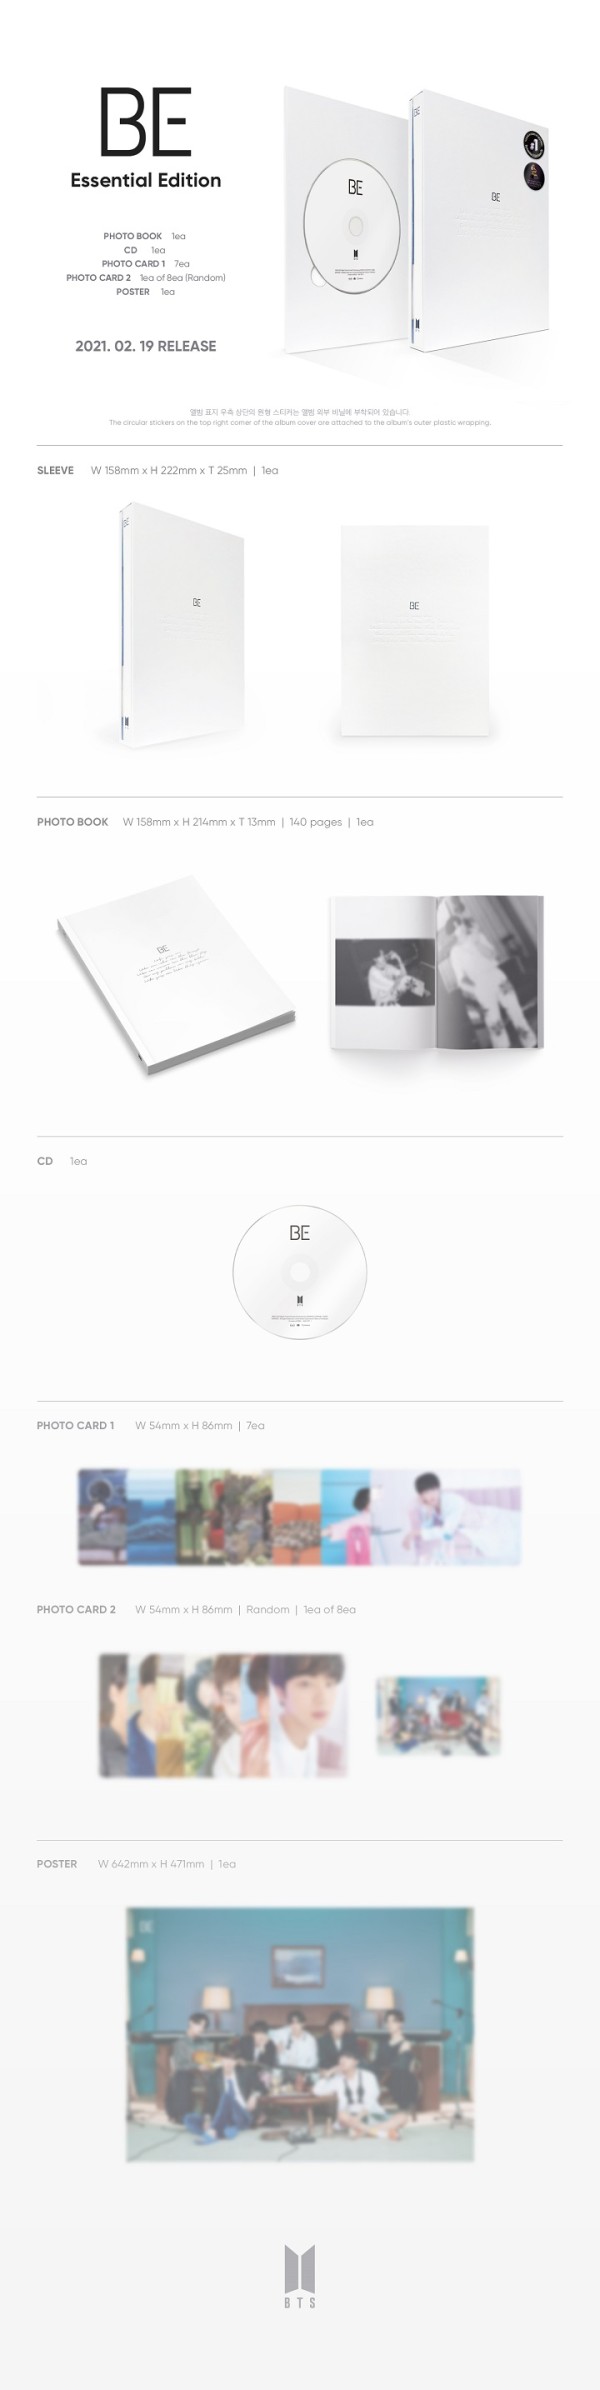 BE(Essential Edition)-BTS